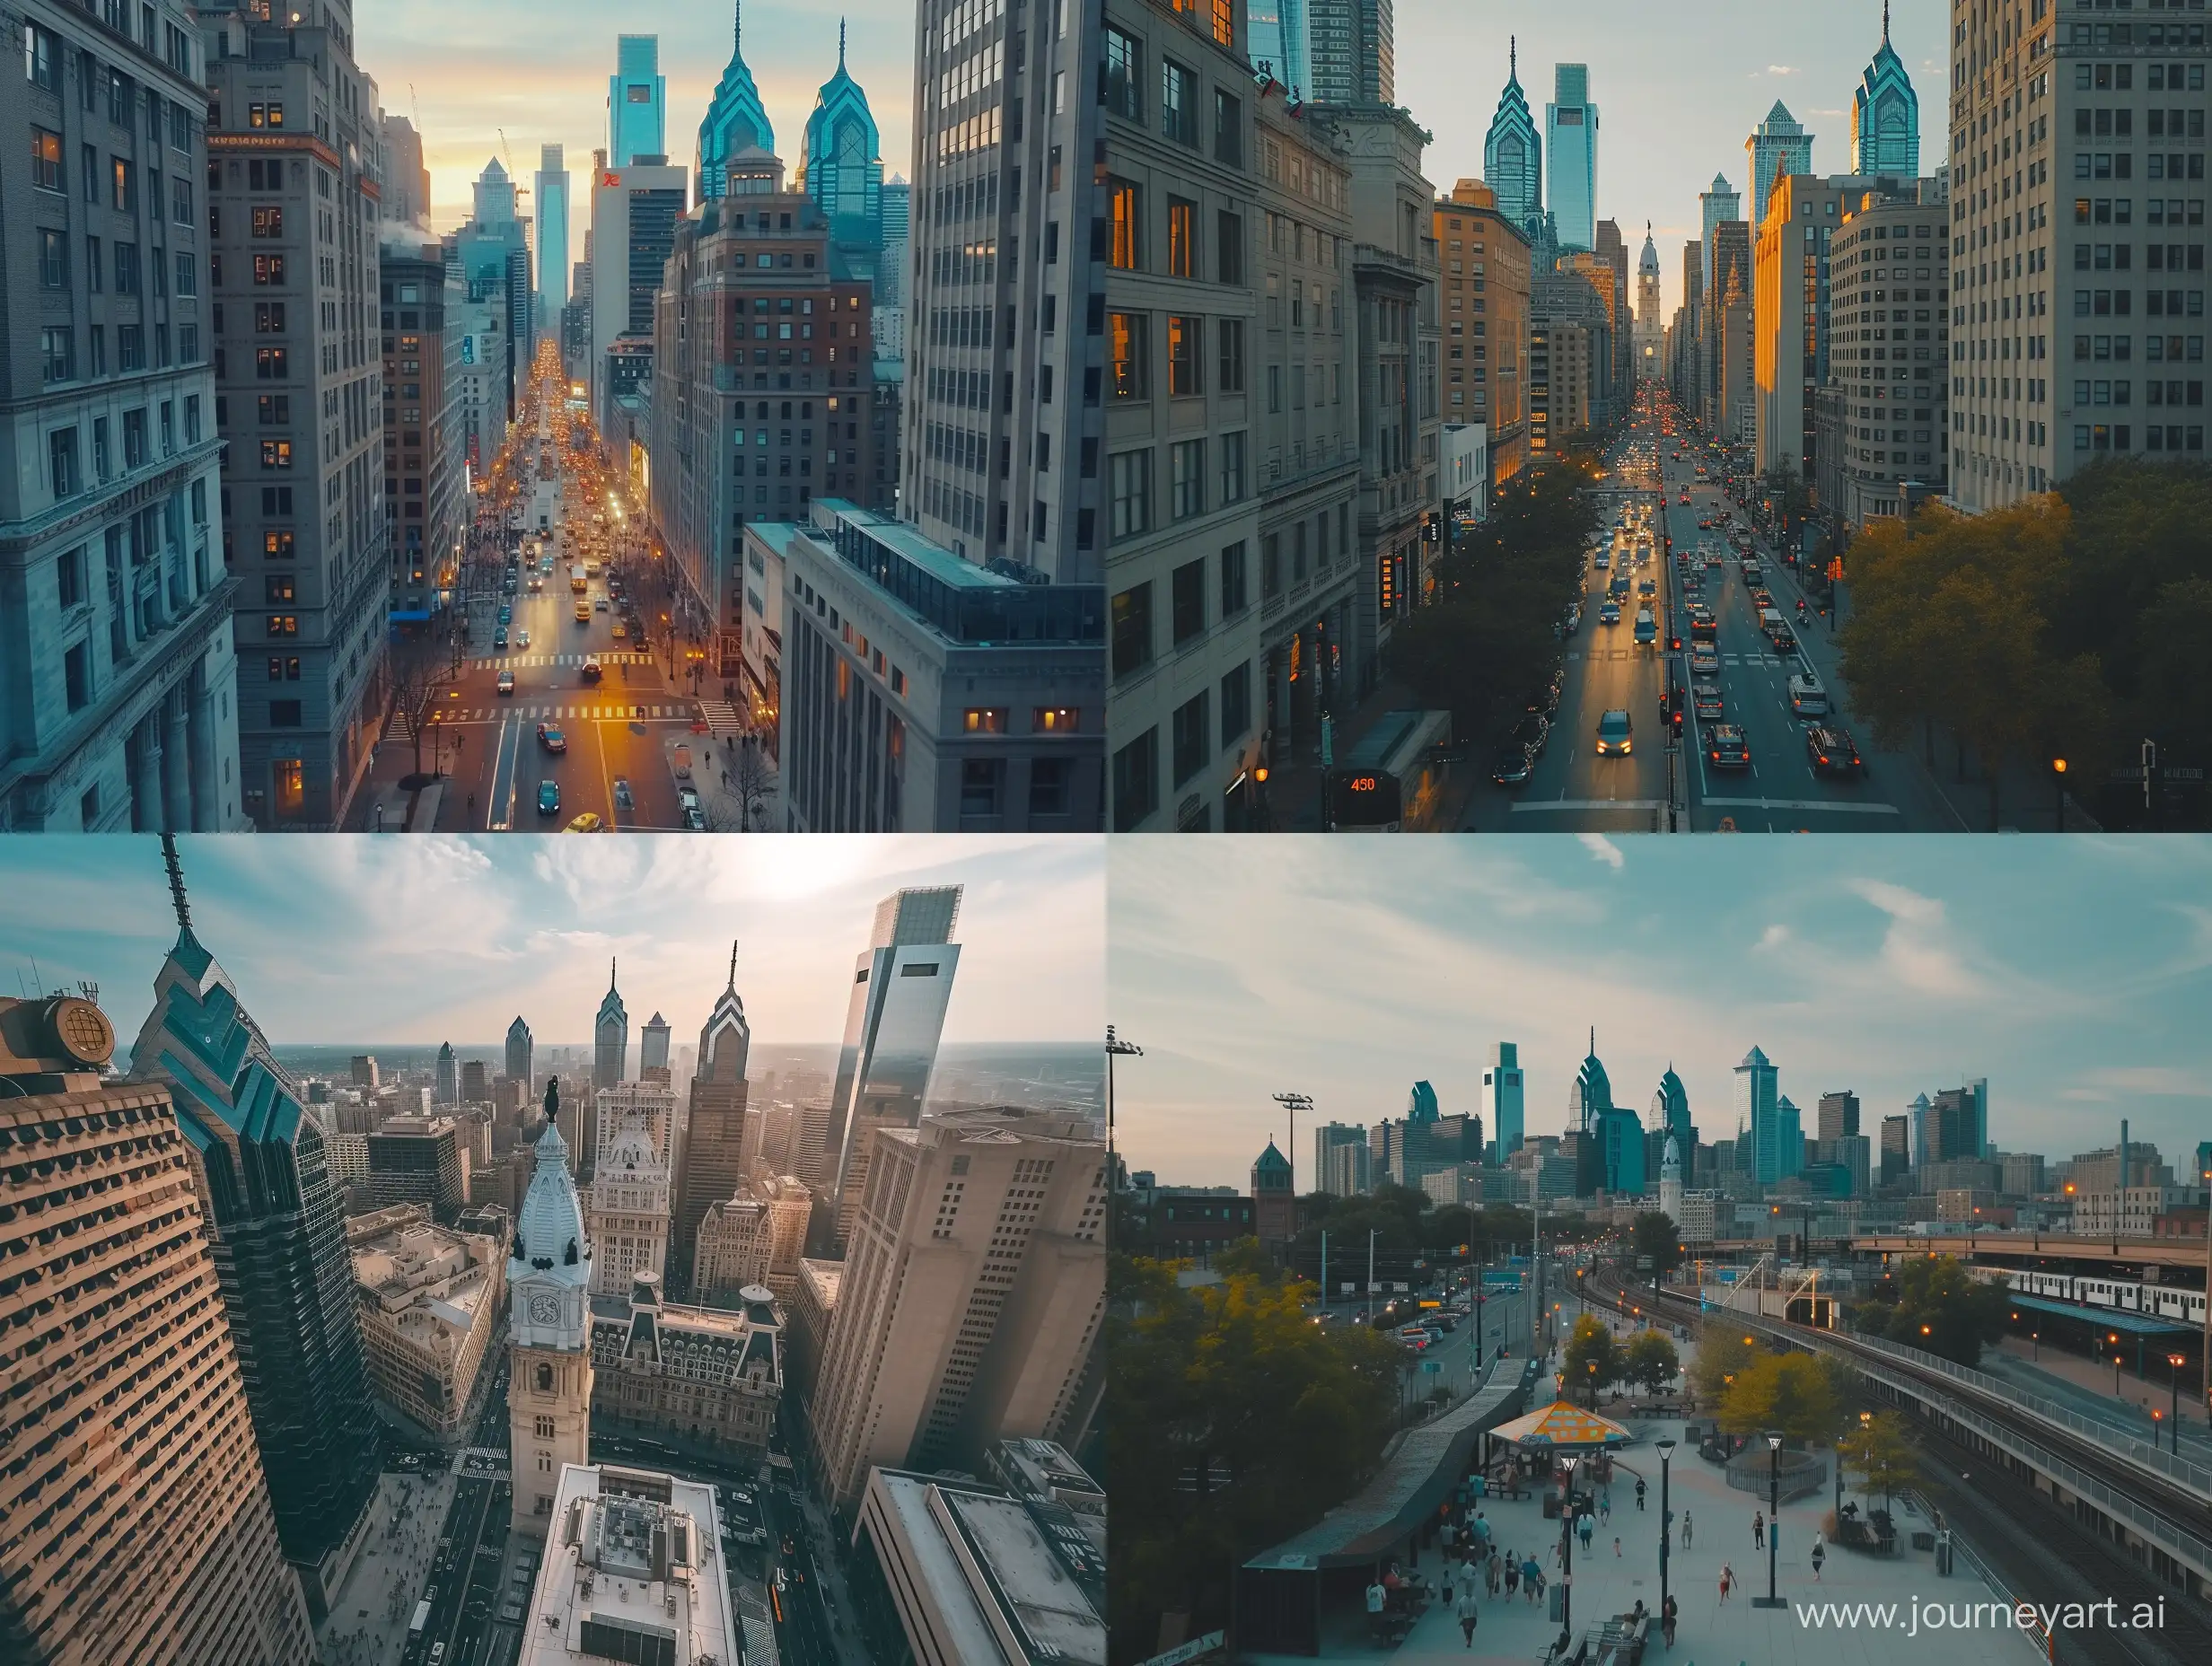 a bustling Philadelphia city, the photo is bathed in natural lighting, day time setting. Shot in 4k with a high end DSLR camera. such as a Canon EOS R5 with a 50mm f/1. 2 lens, vibrance, architecture, drone view, skyline
